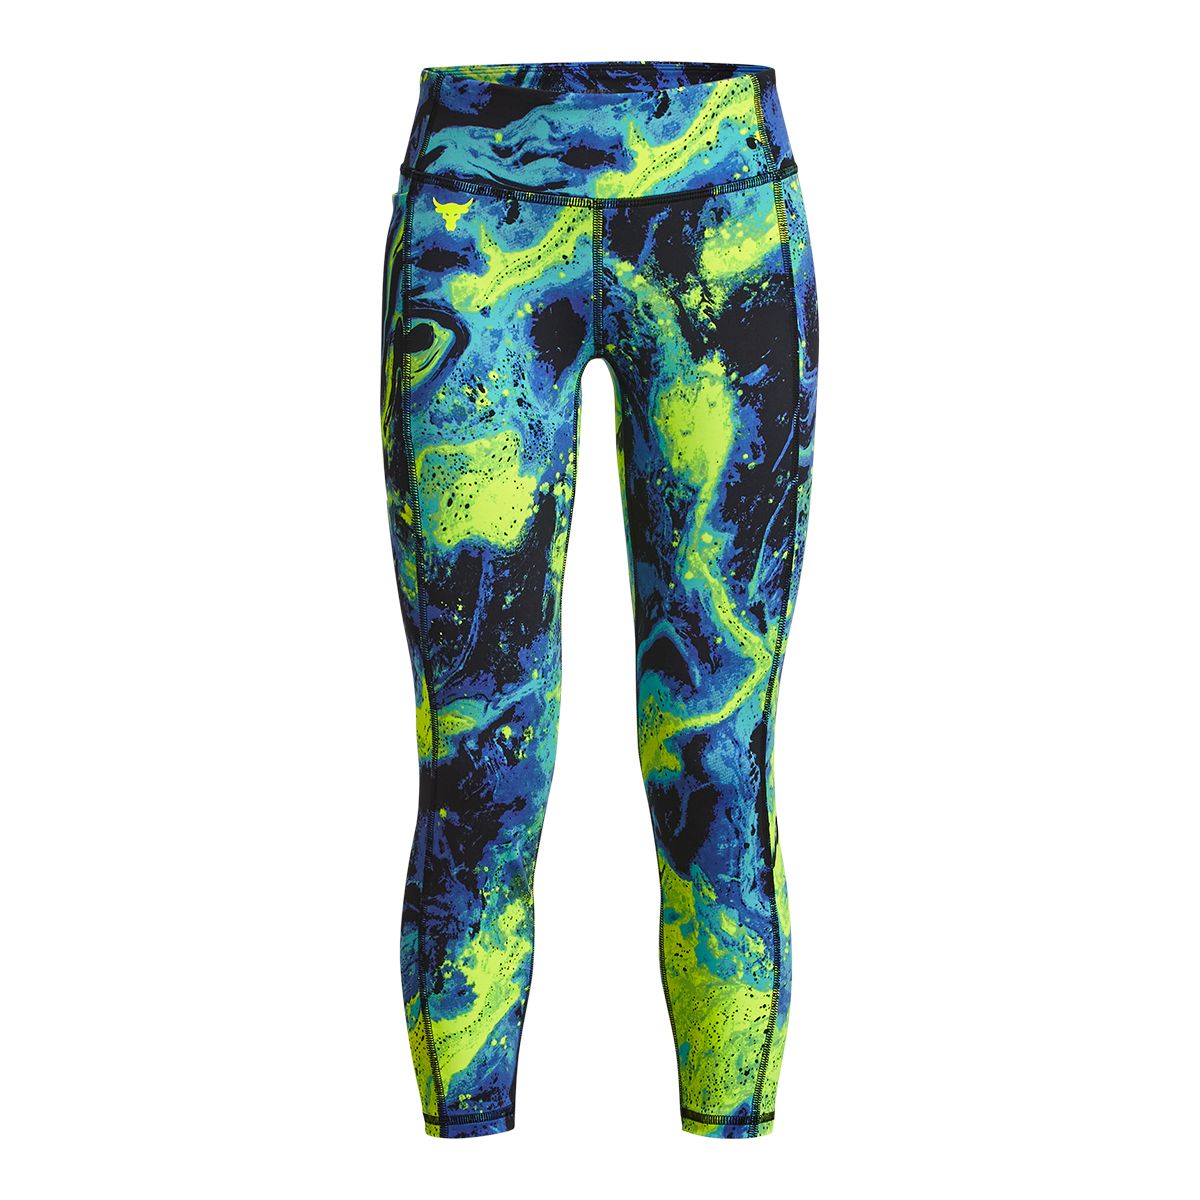 Under Armour Girls' Project Rock Girls Lets go Leggings